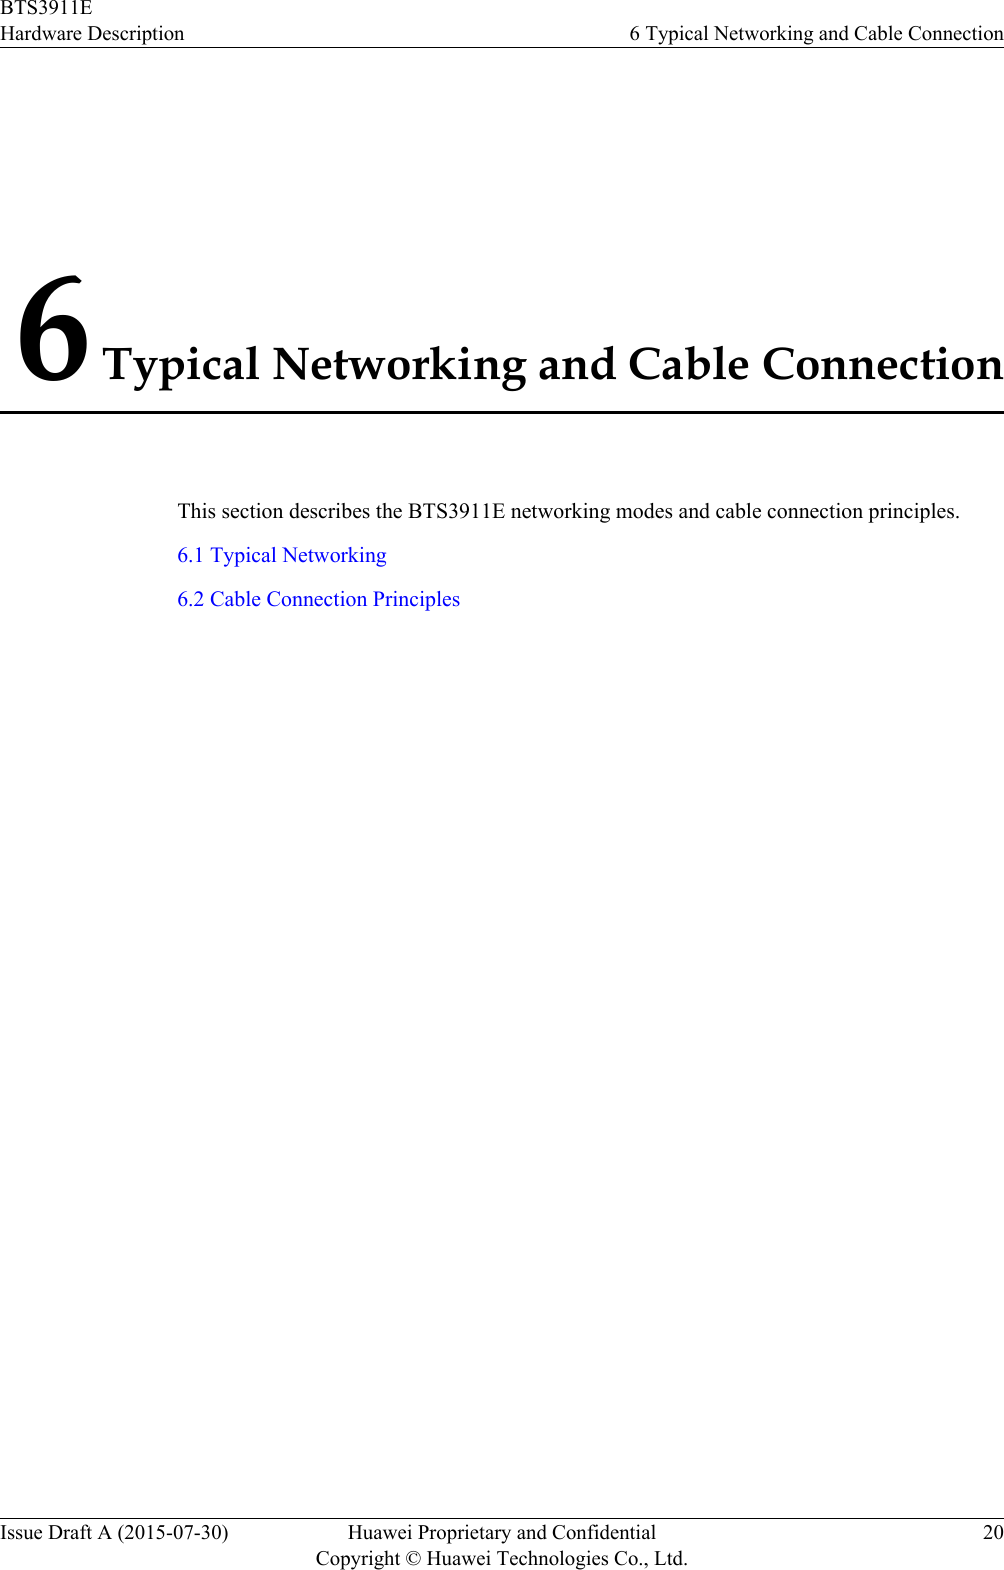 6 Typical Networking and Cable ConnectionThis section describes the BTS3911E networking modes and cable connection principles.6.1 Typical Networking6.2 Cable Connection PrinciplesBTS3911EHardware Description 6 Typical Networking and Cable ConnectionIssue Draft A (2015-07-30) Huawei Proprietary and ConfidentialCopyright © Huawei Technologies Co., Ltd.20